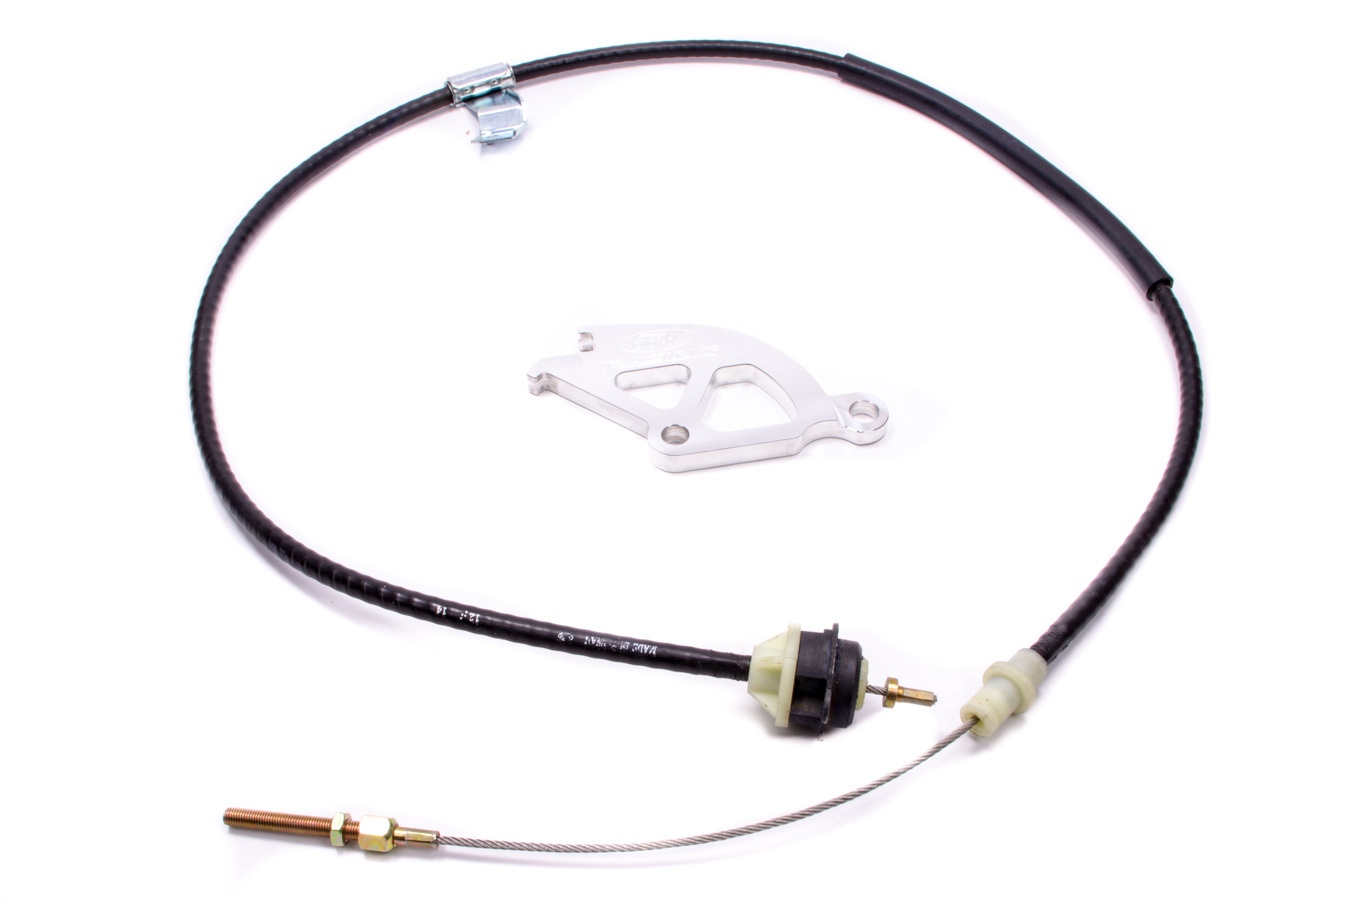 FORD Clutch Quadrant Kit, Adjustable, Double Hook, Cable/Quadrant Included, Ford Mustang 1996-2004, Kit